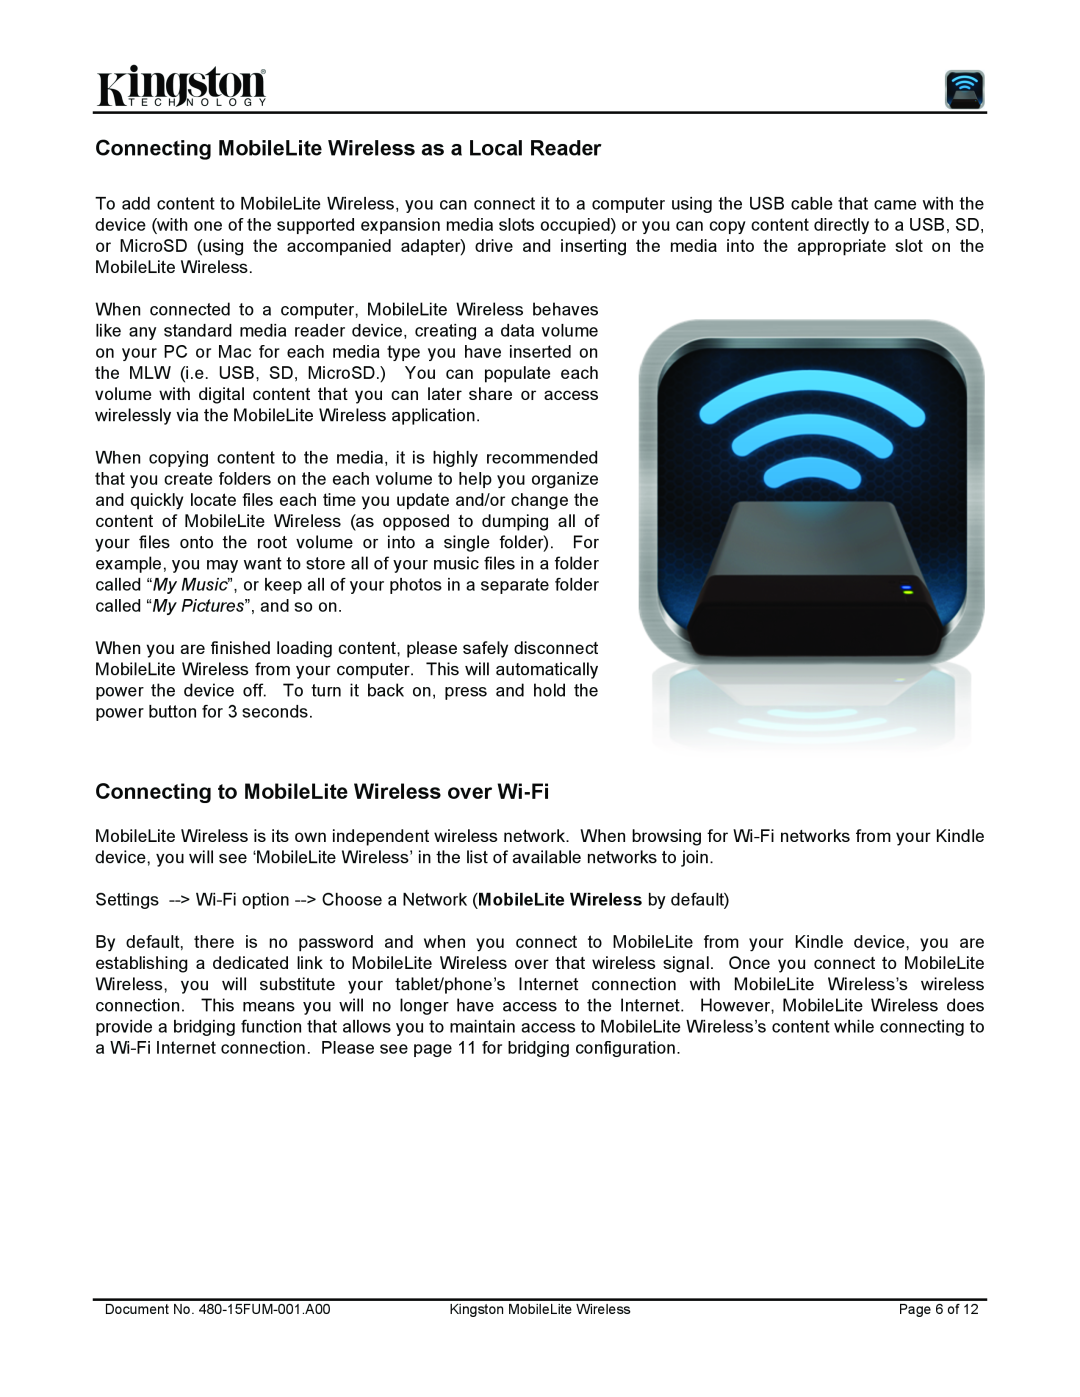 Kingston Technology 480-15FUM-001.A00 user manual Connecting MobileLite Wireless as a Local Reader 